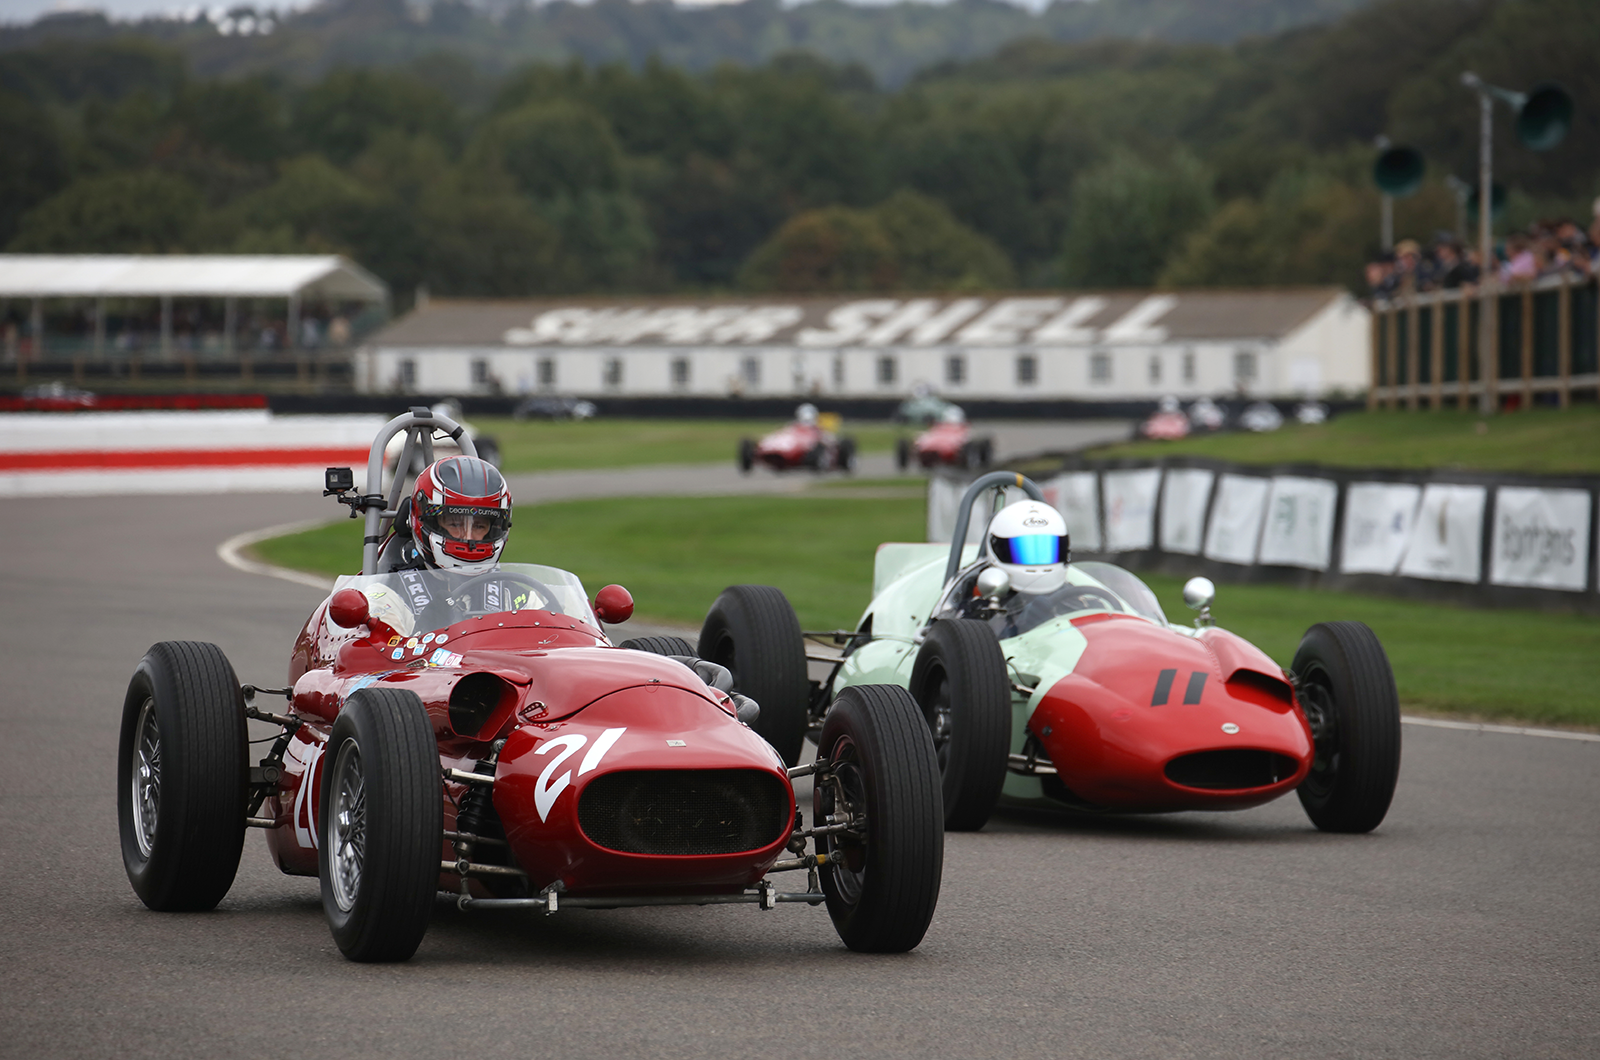 Classic & Sports Car – Goodwood Revival Day Three: the highlights